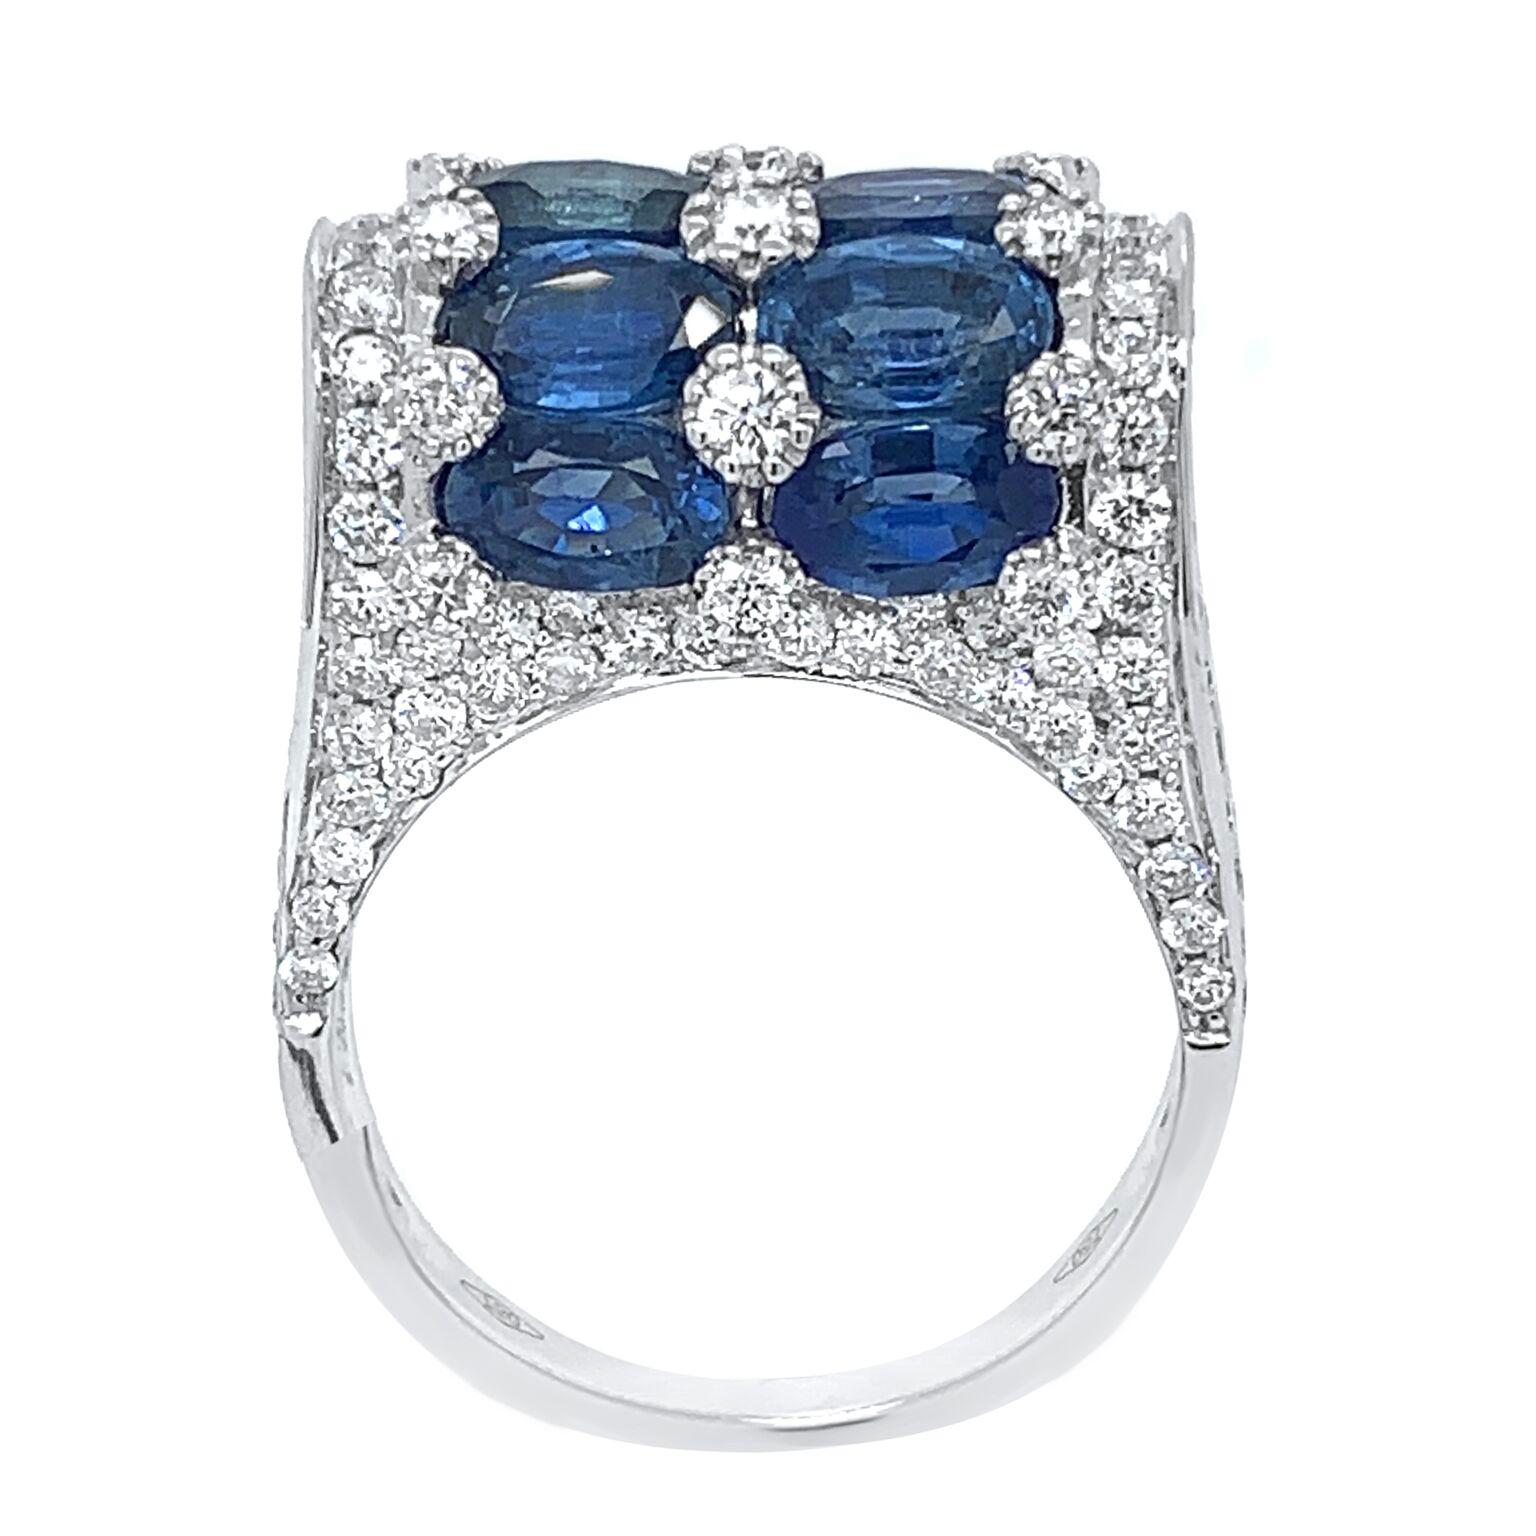 Size: 7.5
Metal: Gold
Metal color: White 
Gemstone: Diamond and Sapphire
Sapphire Weight: 5.46 CT
Diamond Weight: 1.89 CT